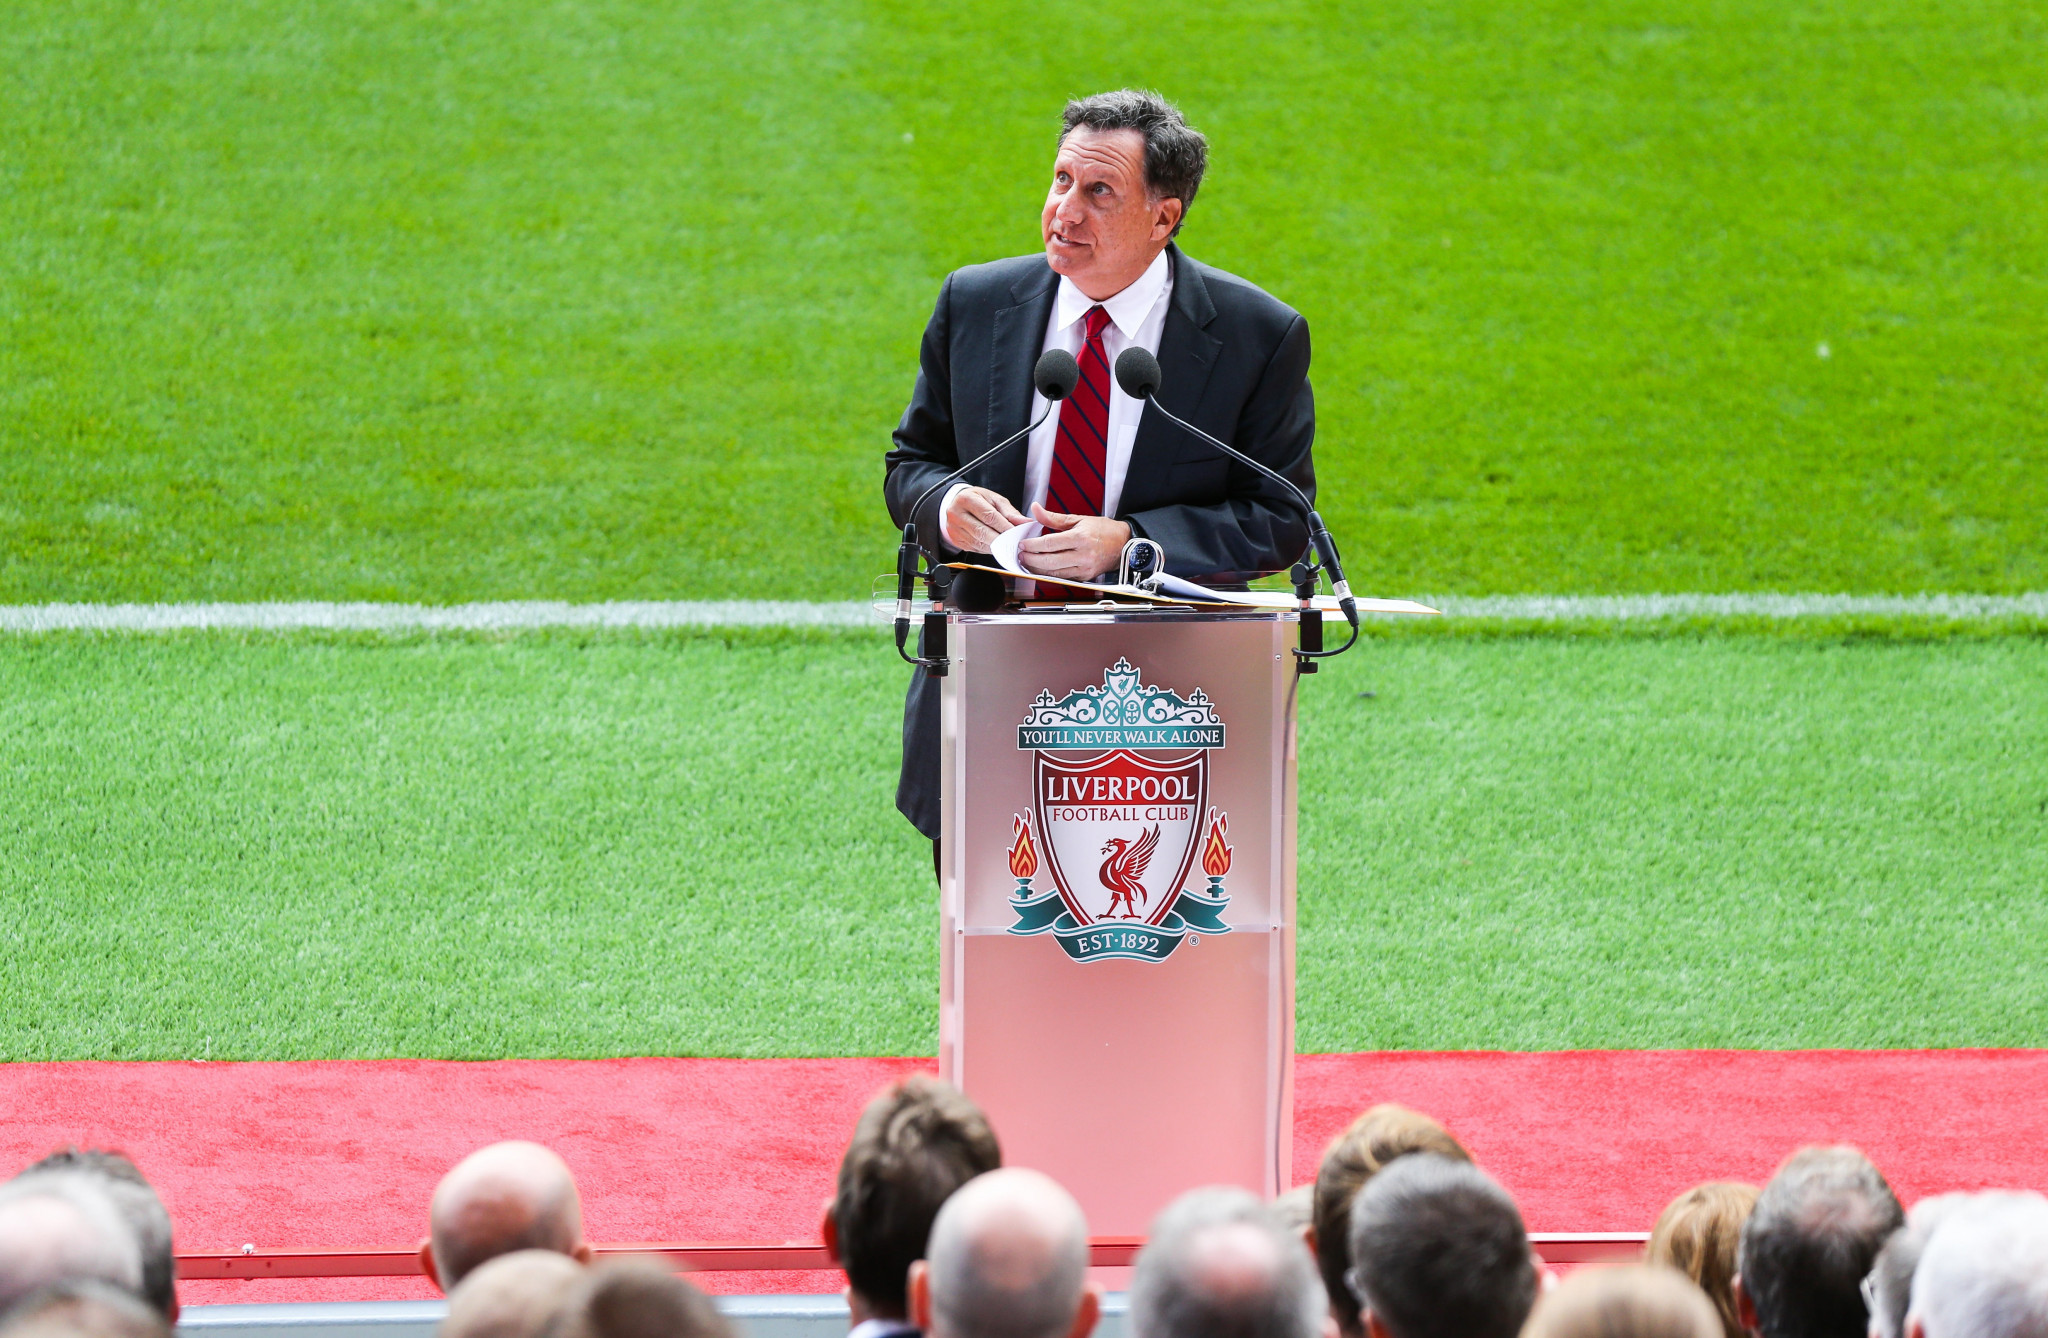 Liverpool chairman Tom Werner has accused French Sports Minister Amélie Oudéa-Castéra of making 